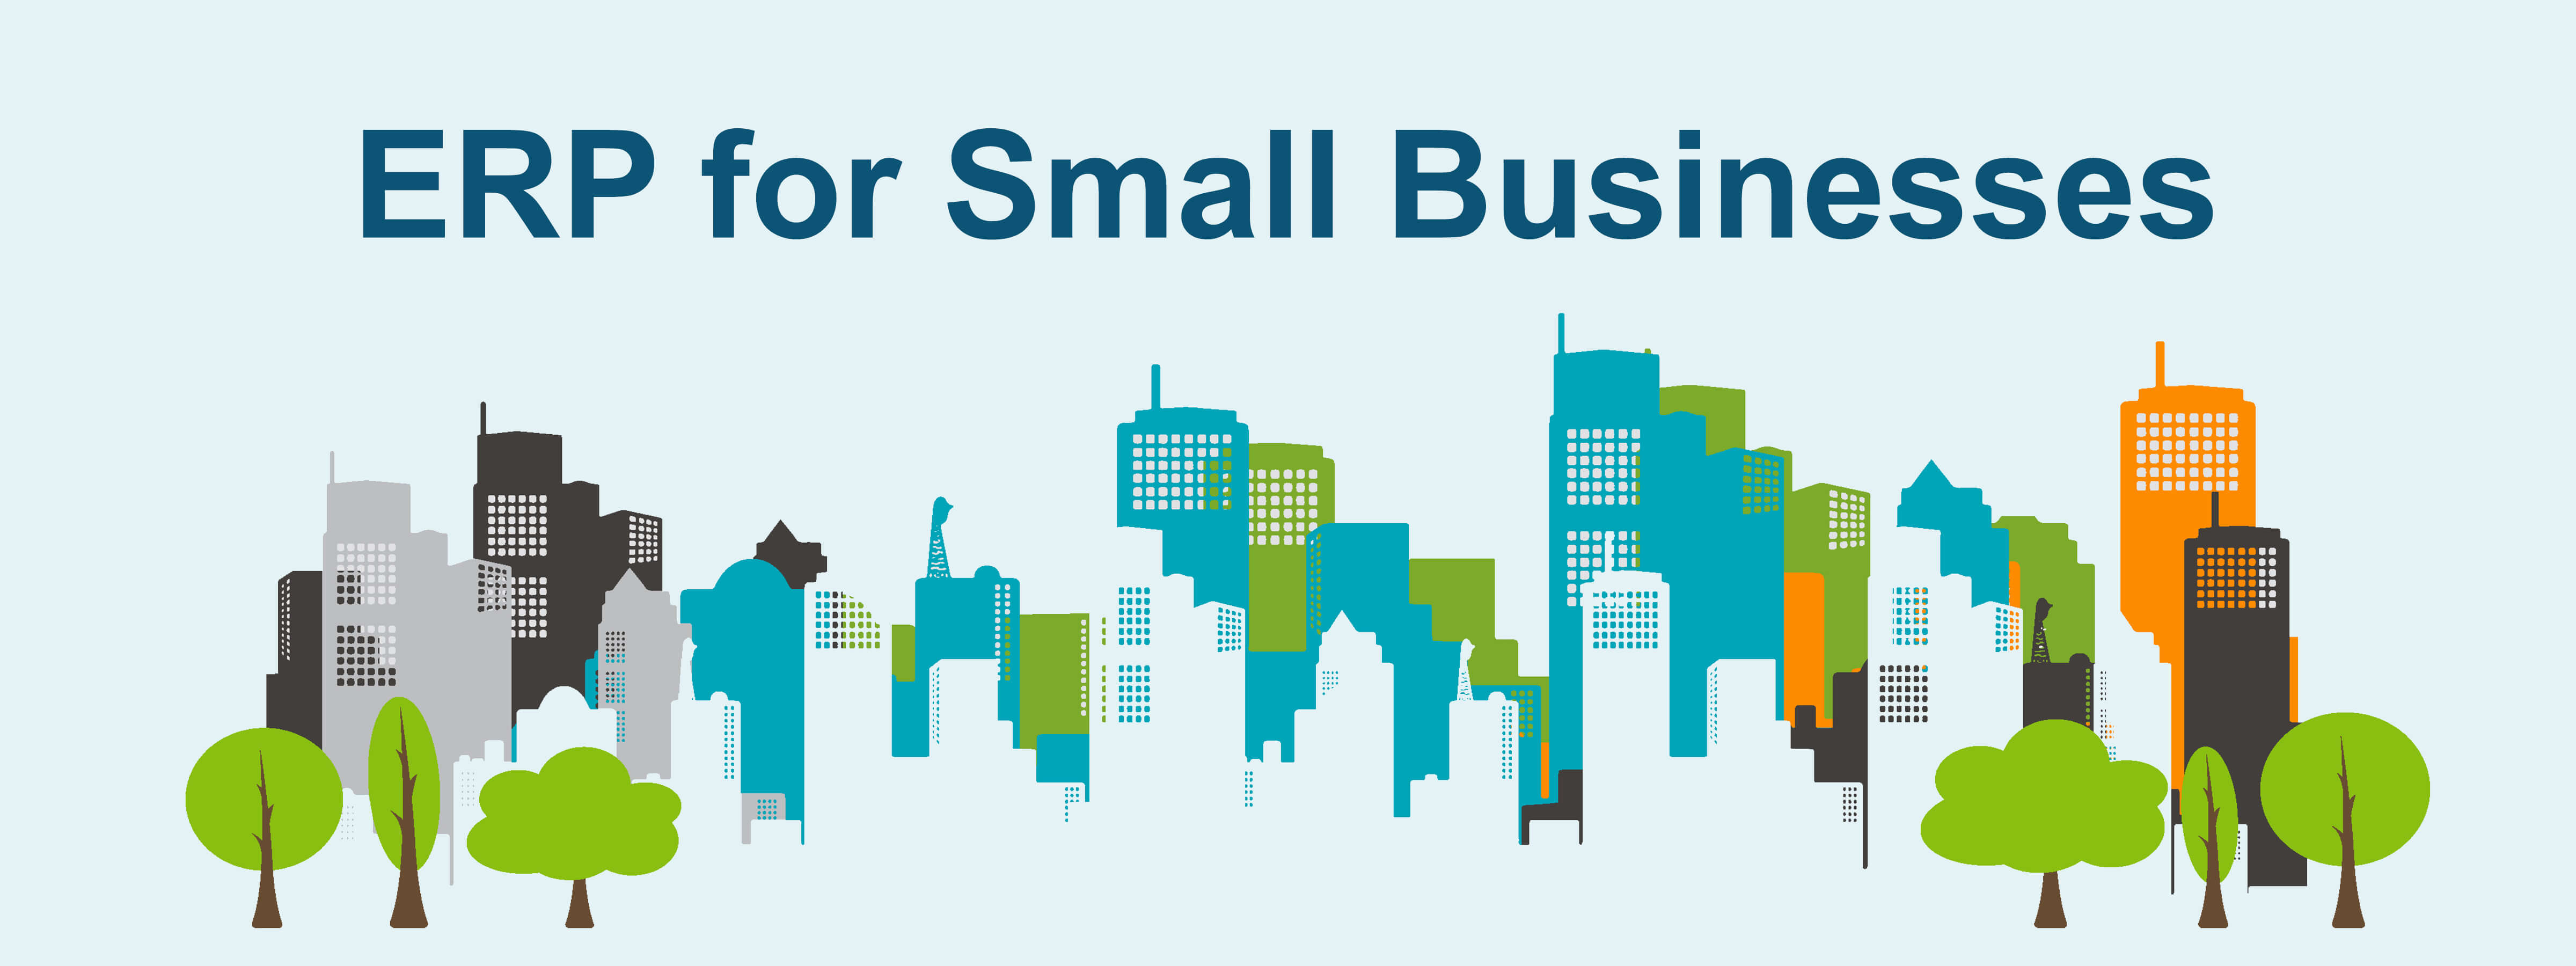 erp-for-small-business